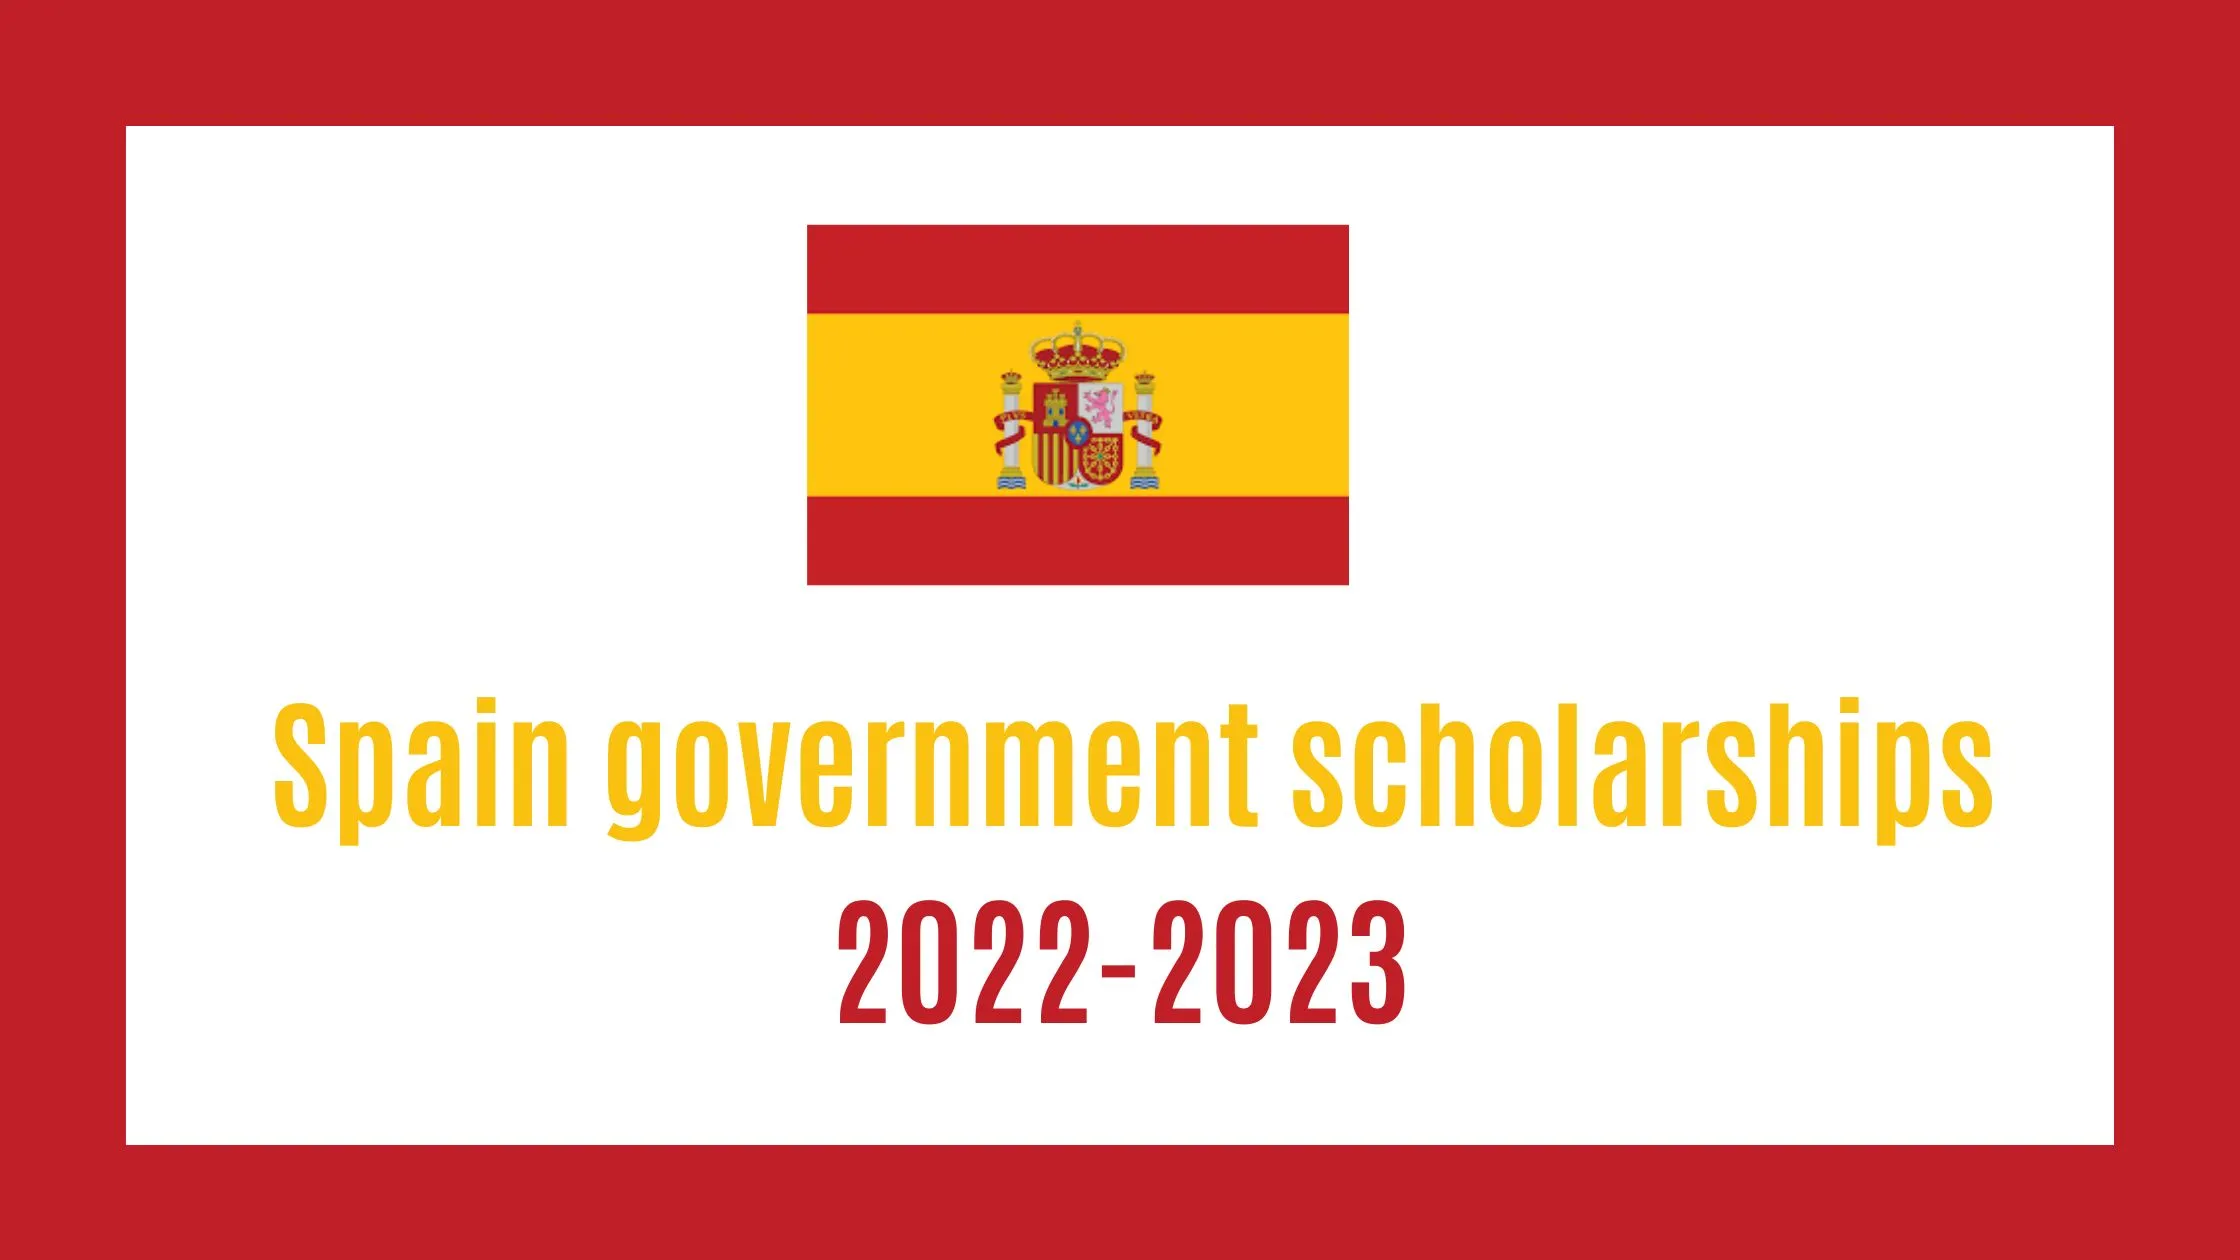 Spain government scholarships 2022-2023